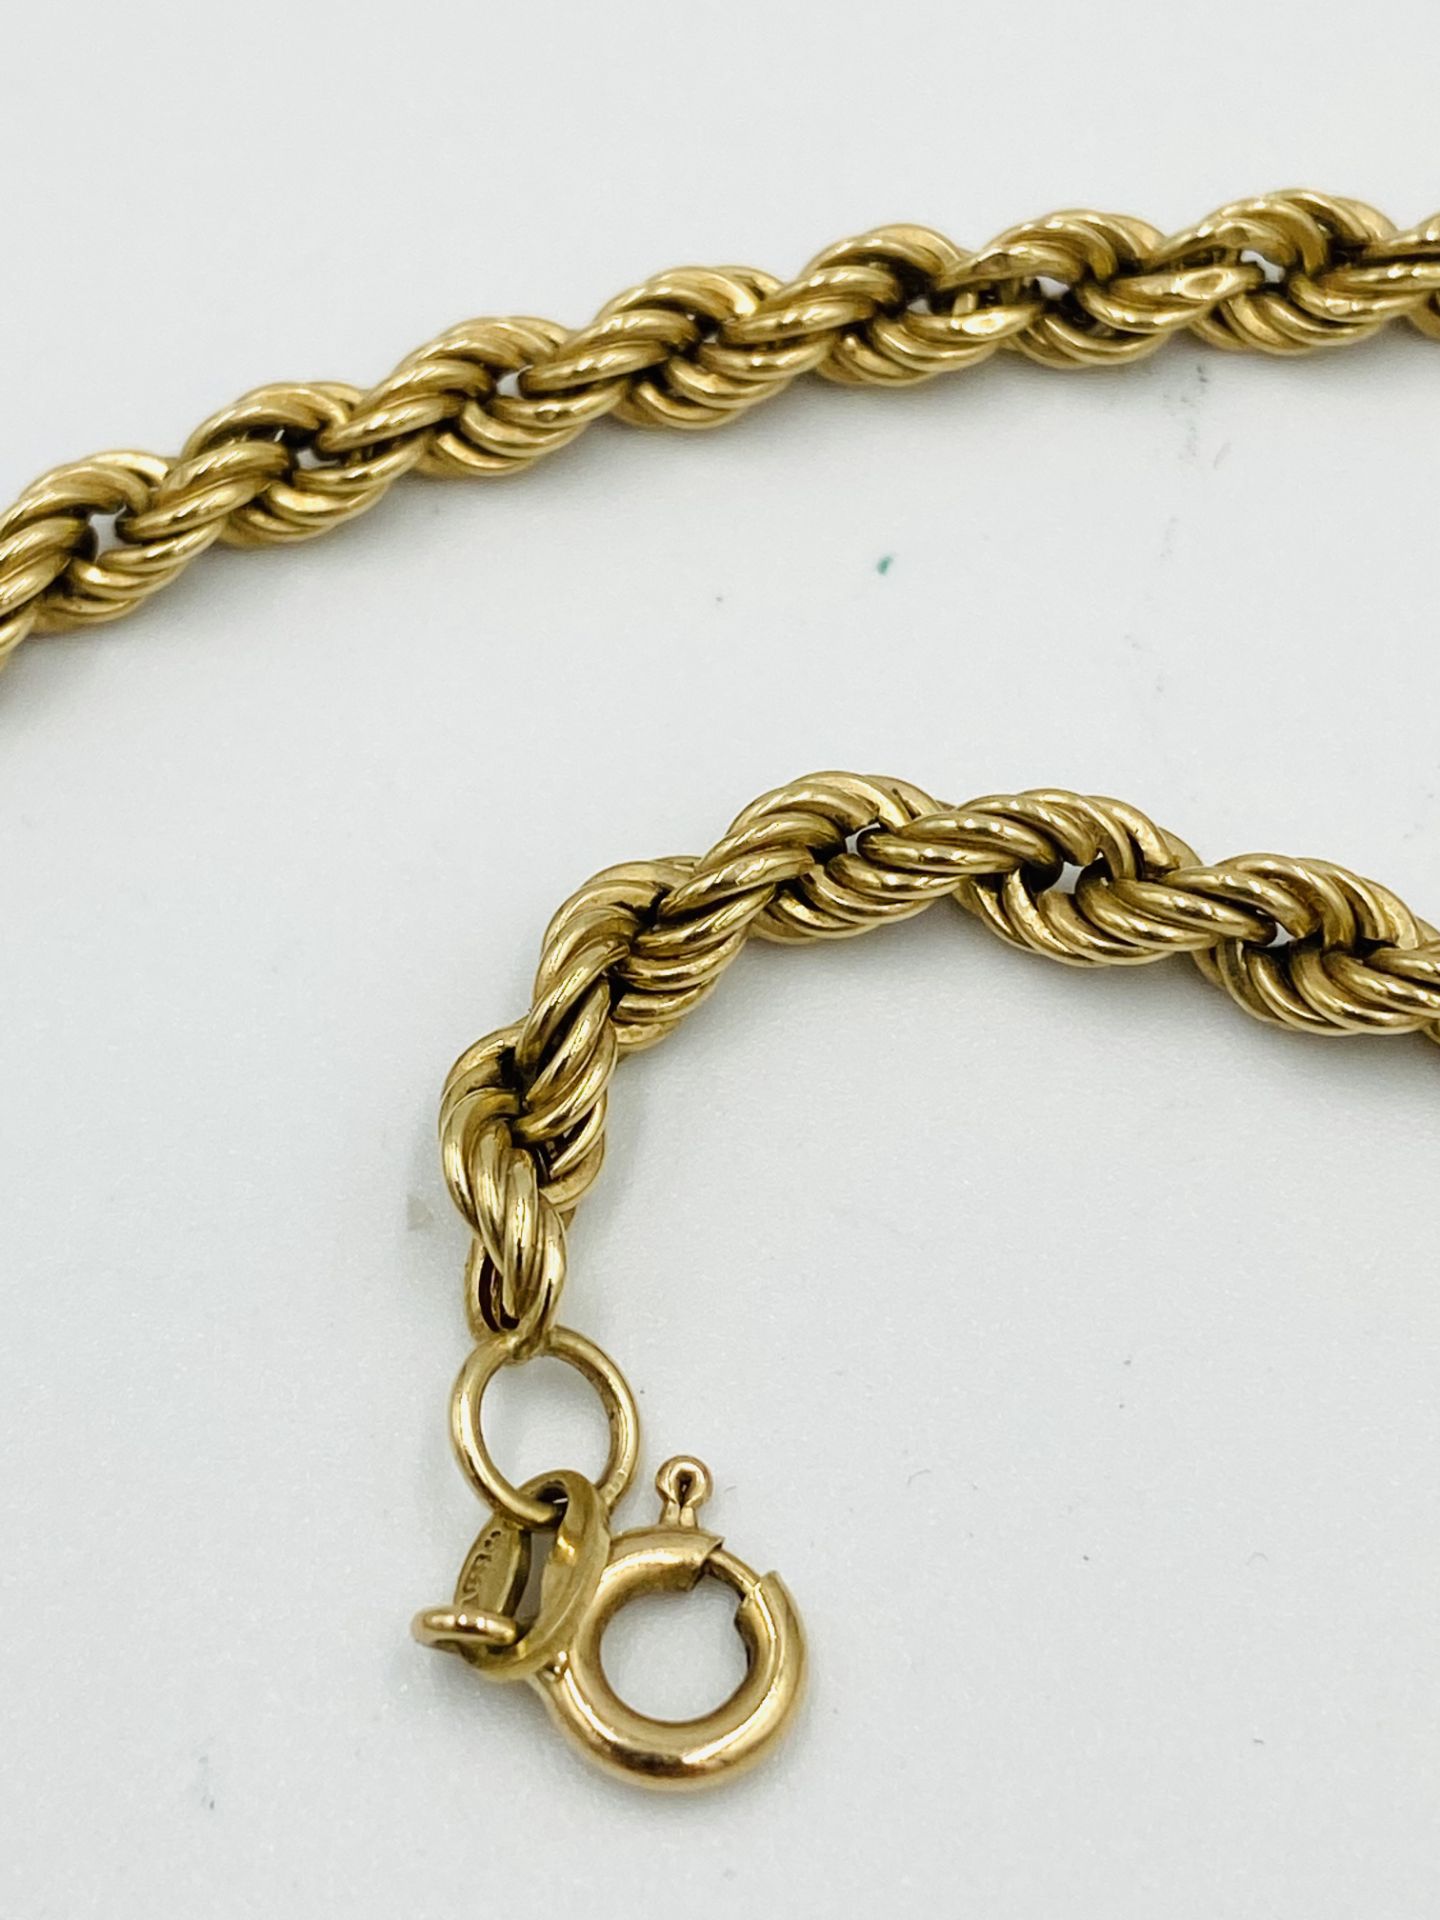 9ct gold rope twist chain - Image 3 of 5